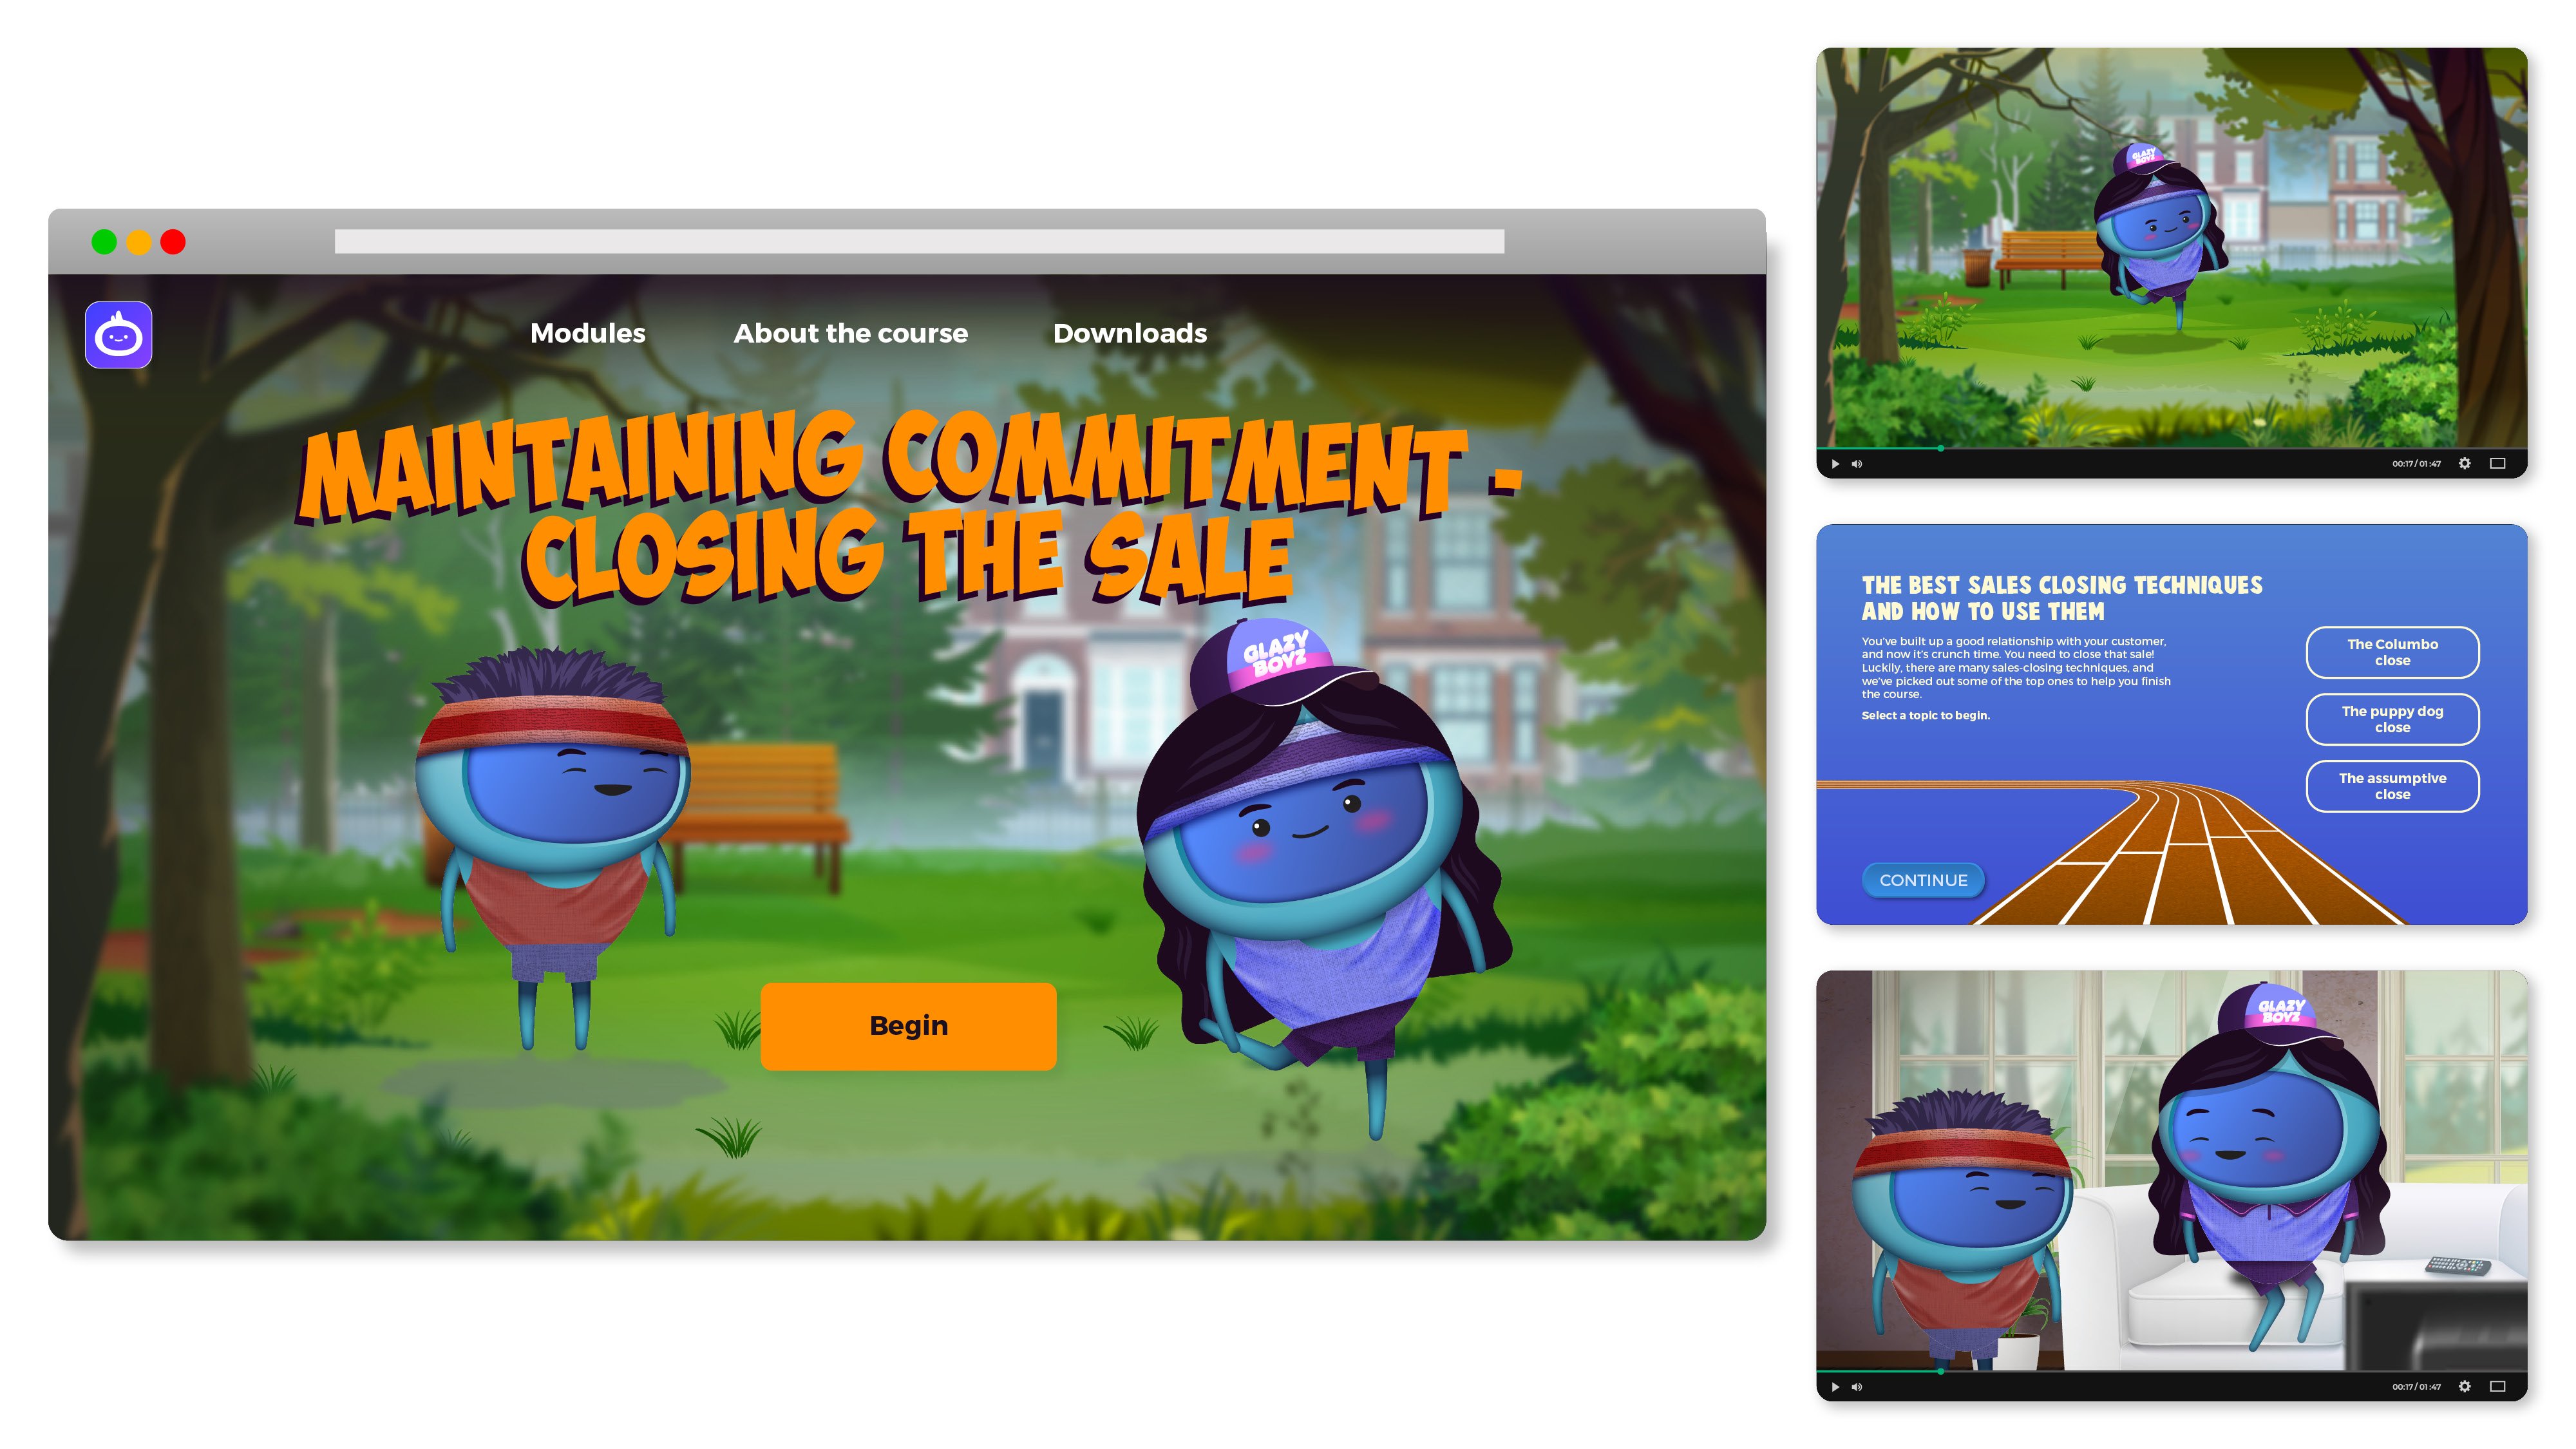 iAM 00184 - Maintaining Commitment - Closing the Sale - Landing Page